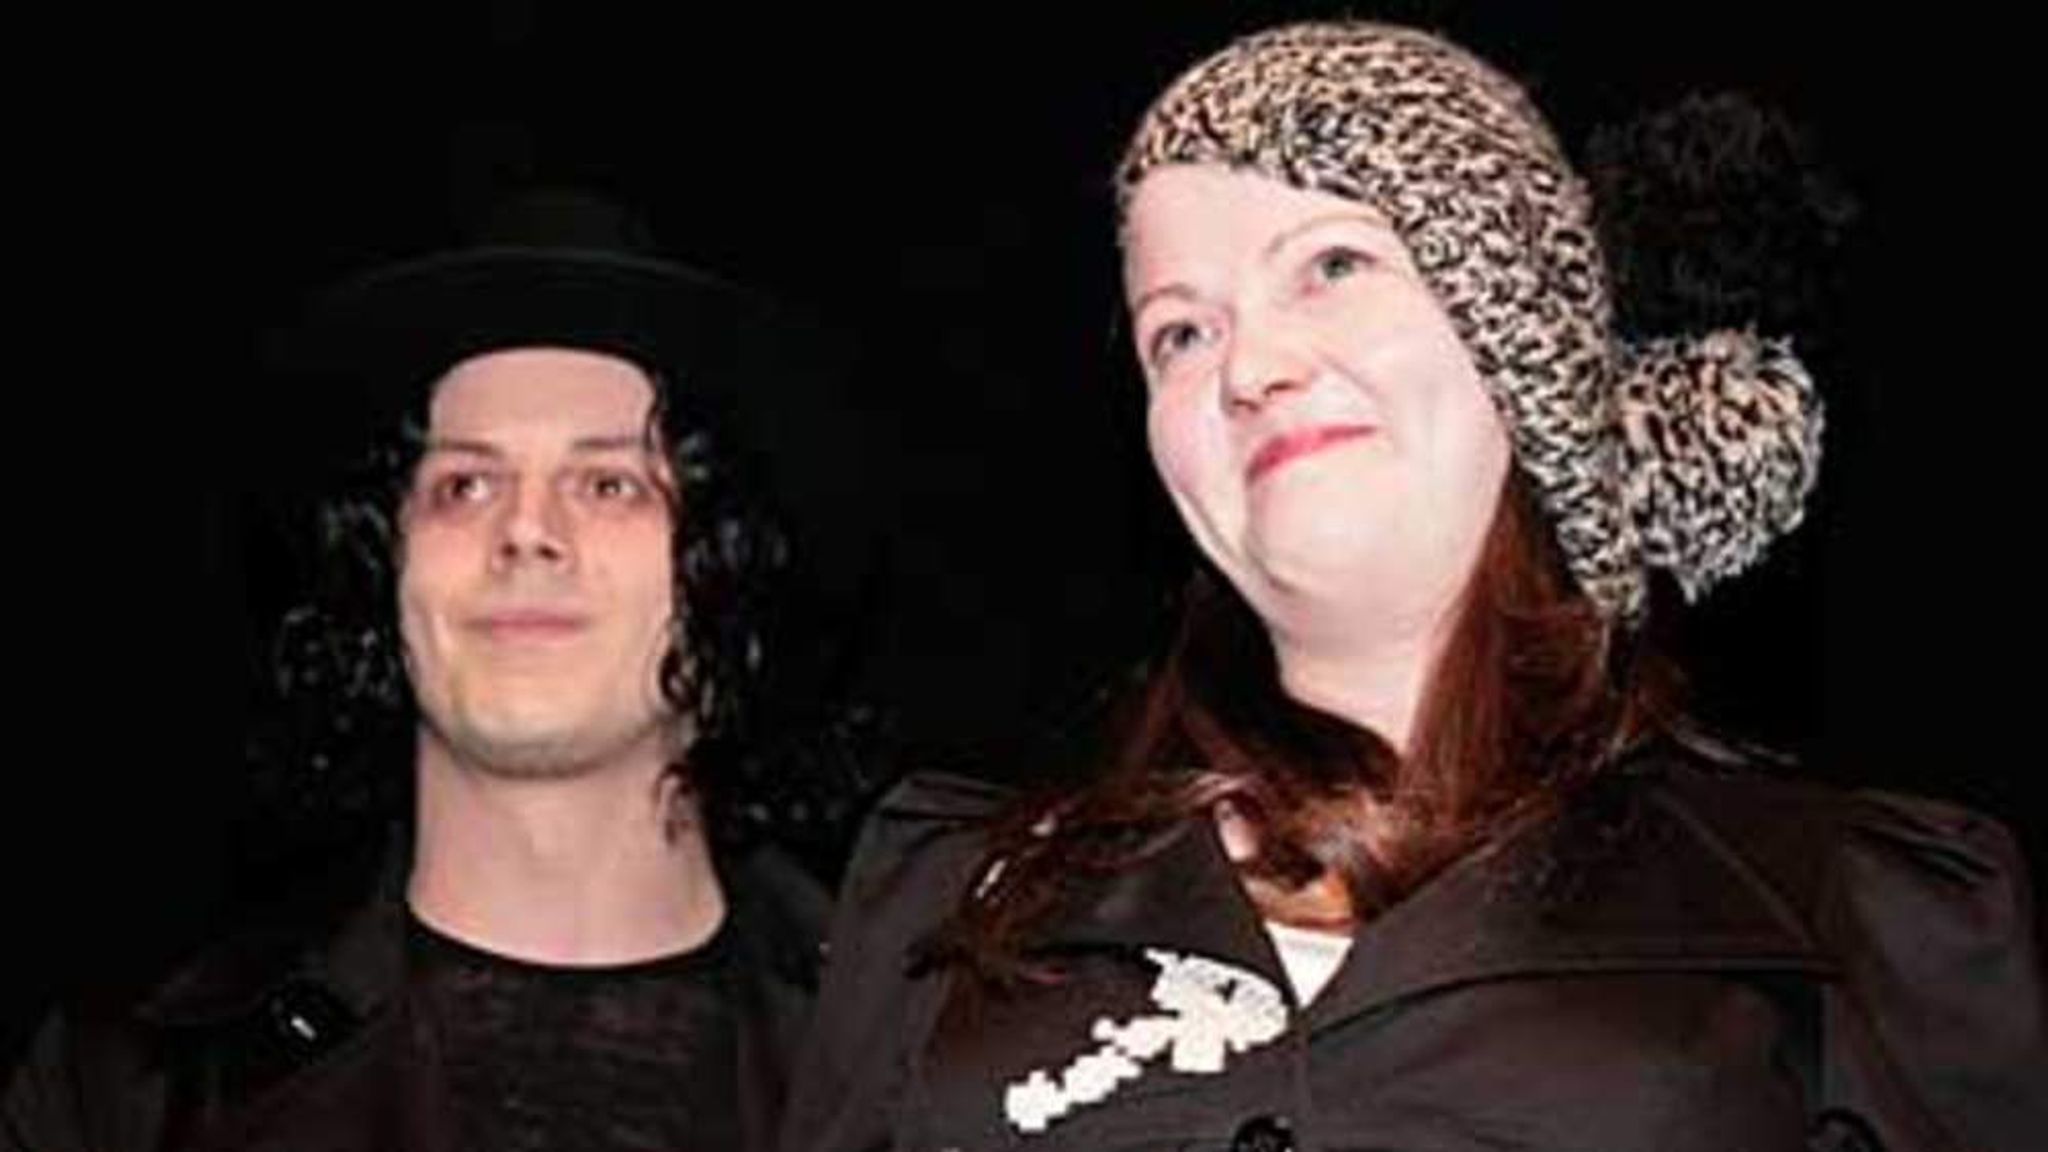 The White Stripes Split After 13 Years, Ents & Arts News